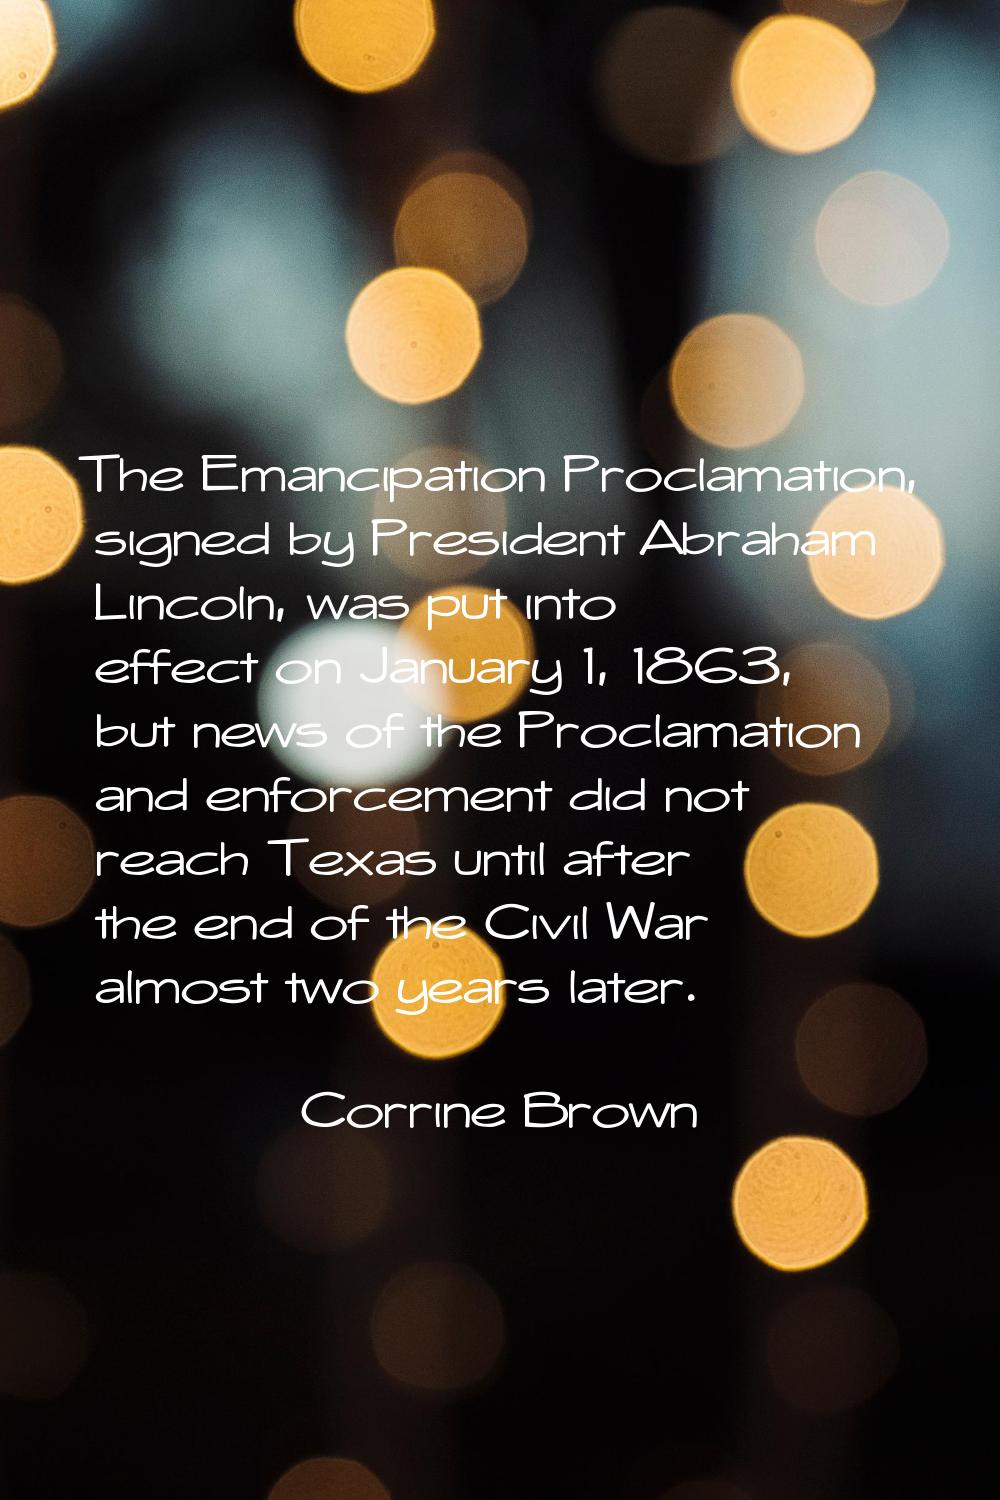 The Emancipation Proclamation, signed by President Abraham Lincoln, was put into effect on January 